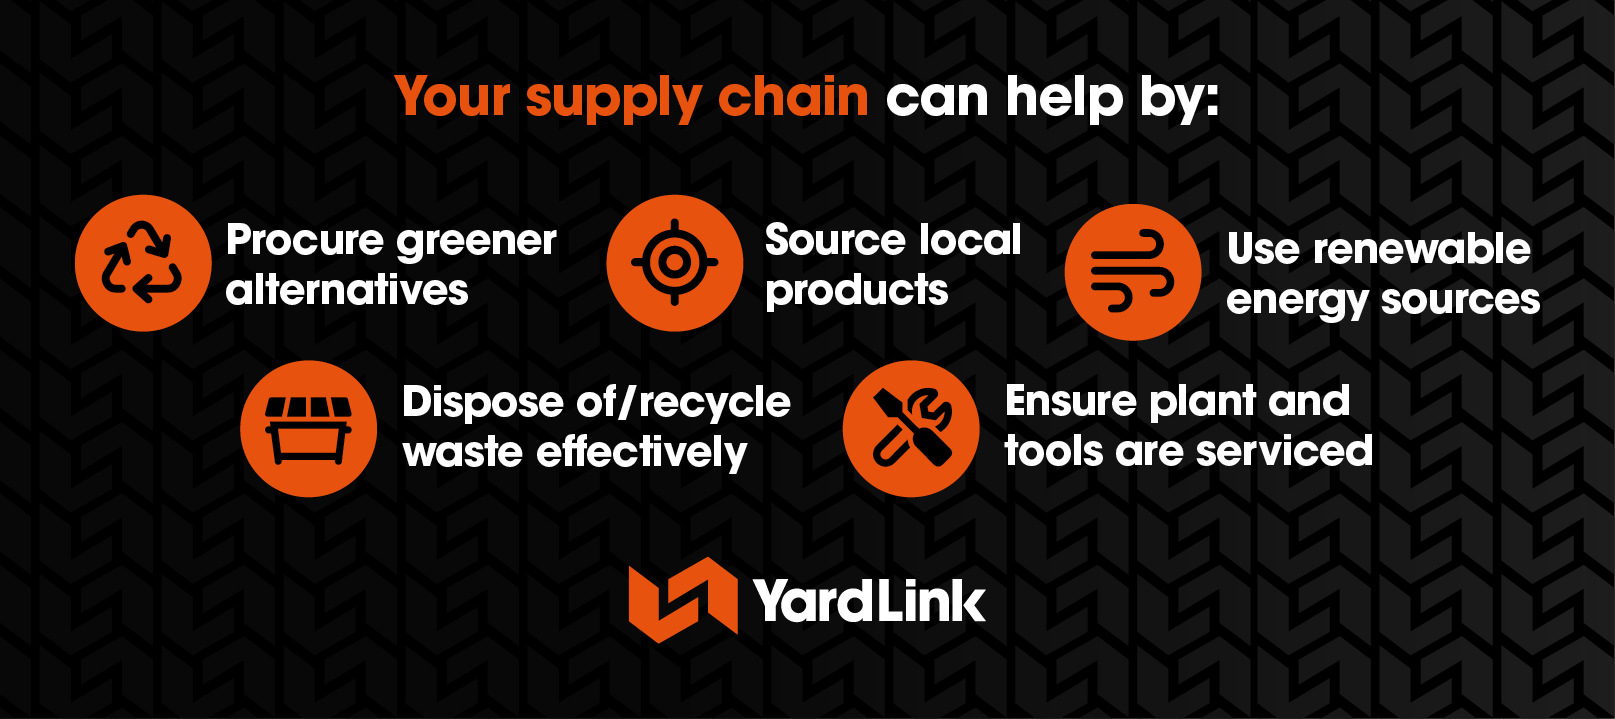 Supply Chain Can Help